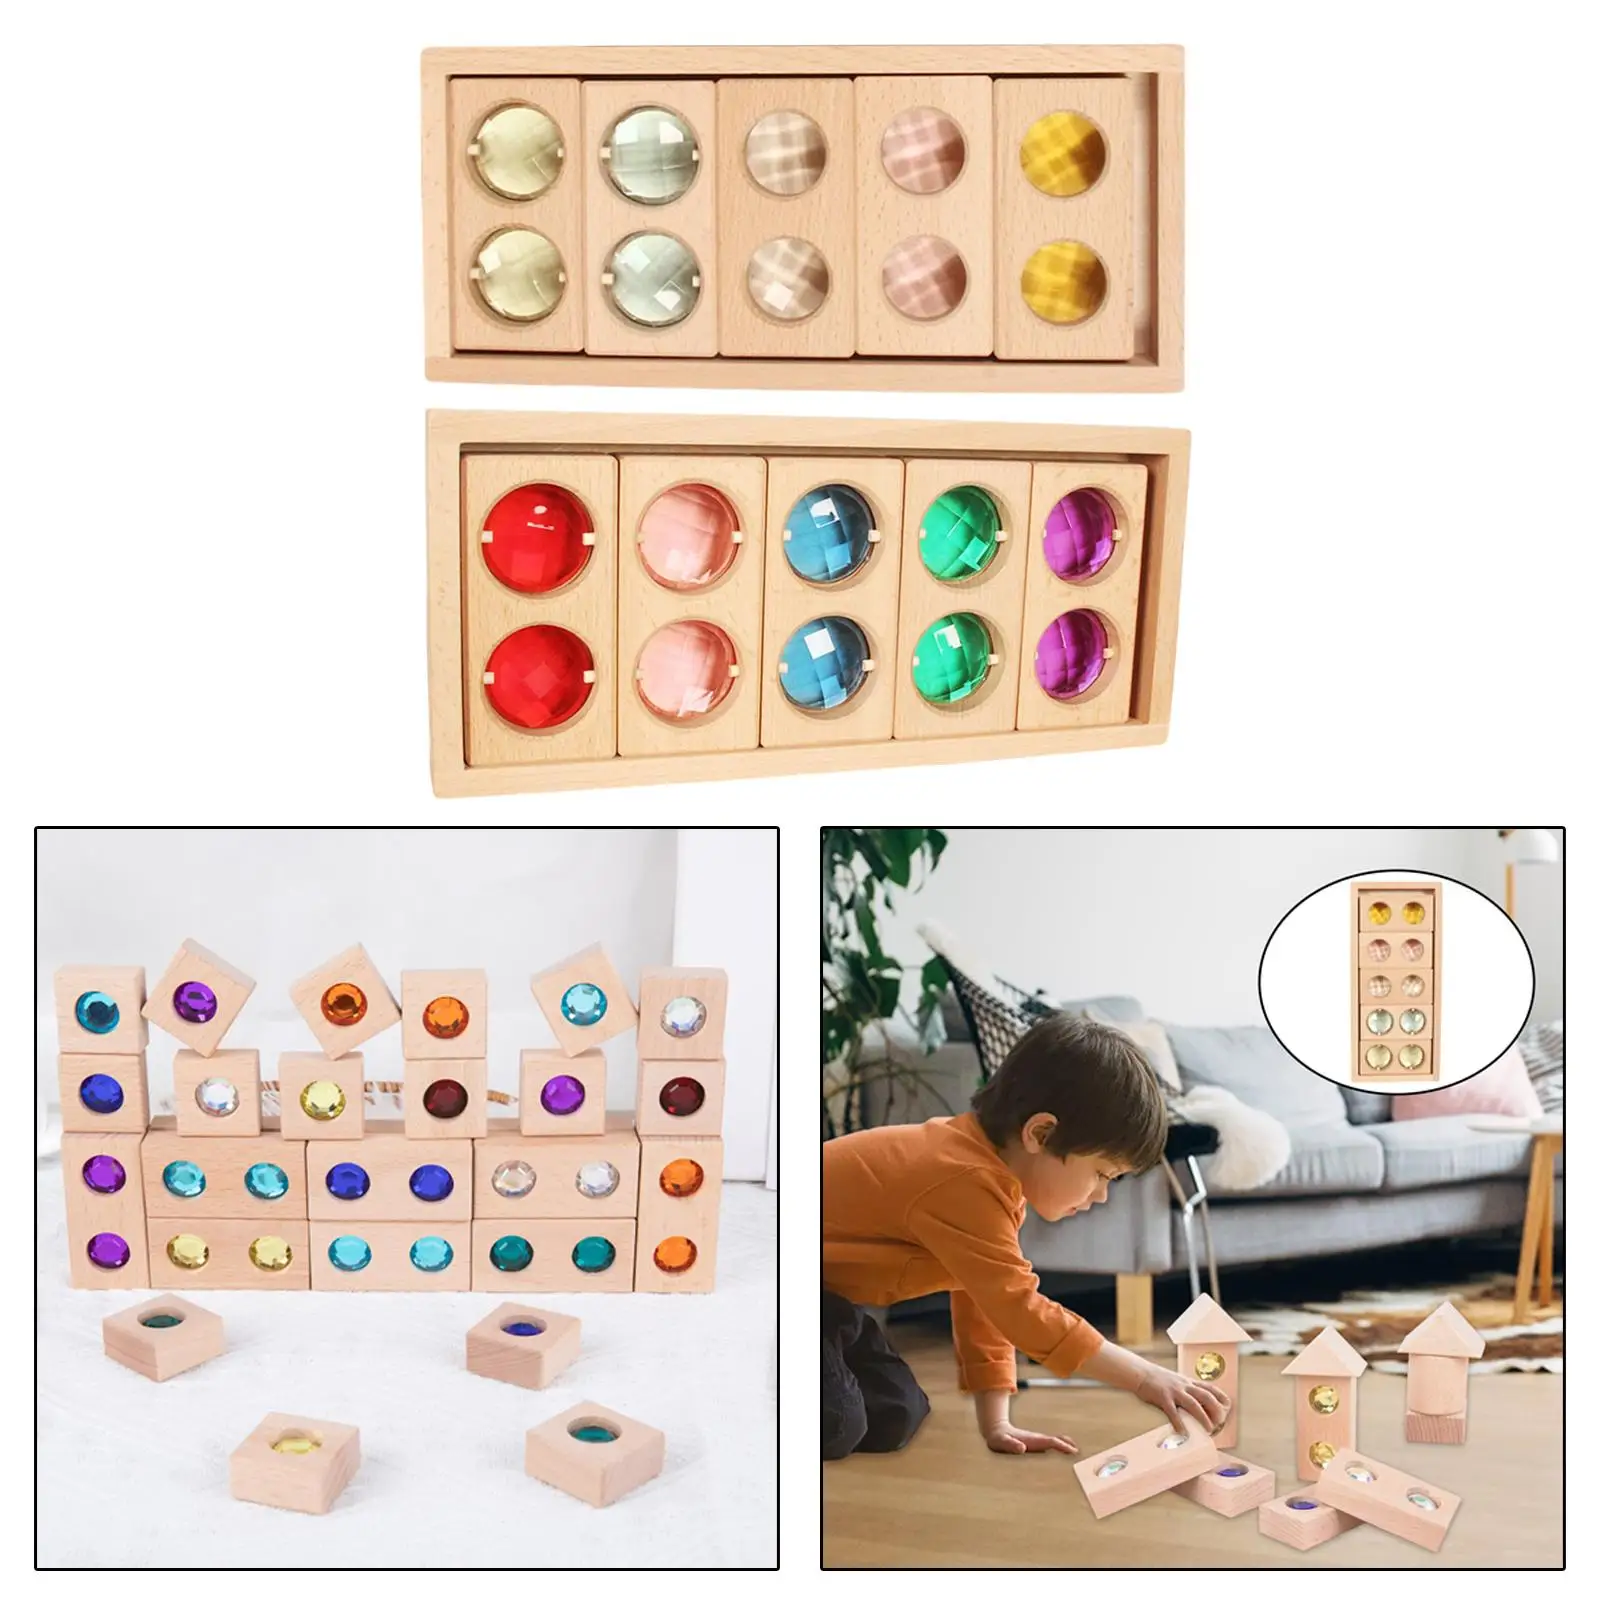 Wooden Toy Colorful Rainbow Gemstone Blocks for Developing Color Perception